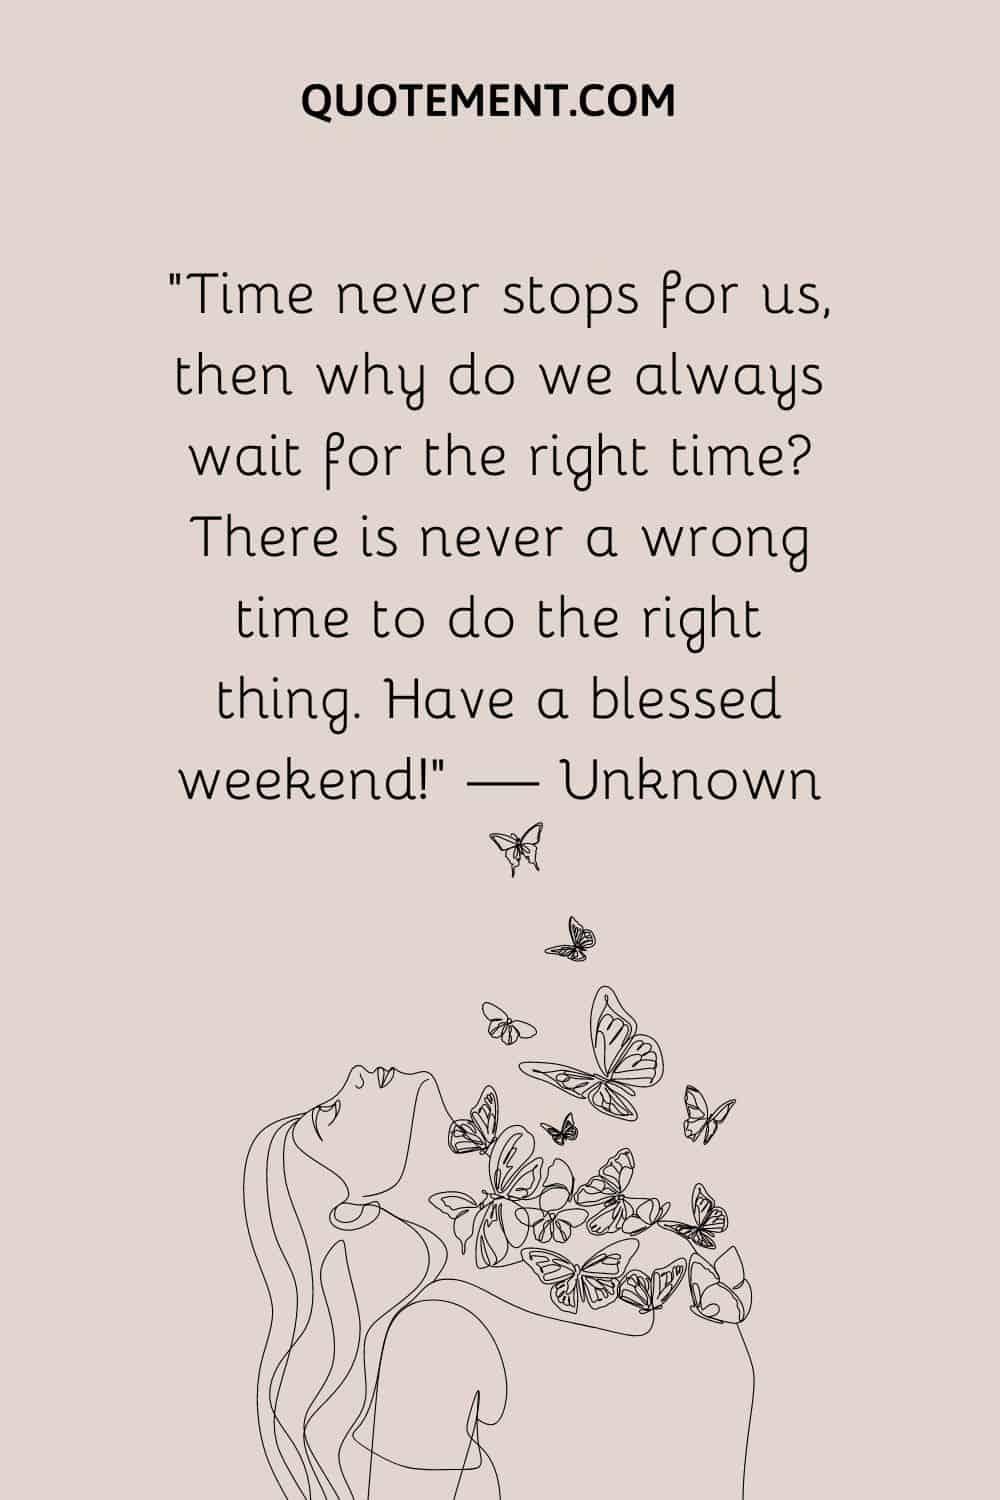 “Time never stops for us, then why do we always wait for the right time There is never a wrong time to do the right thing. Have a blessed weekend!” — Unknown